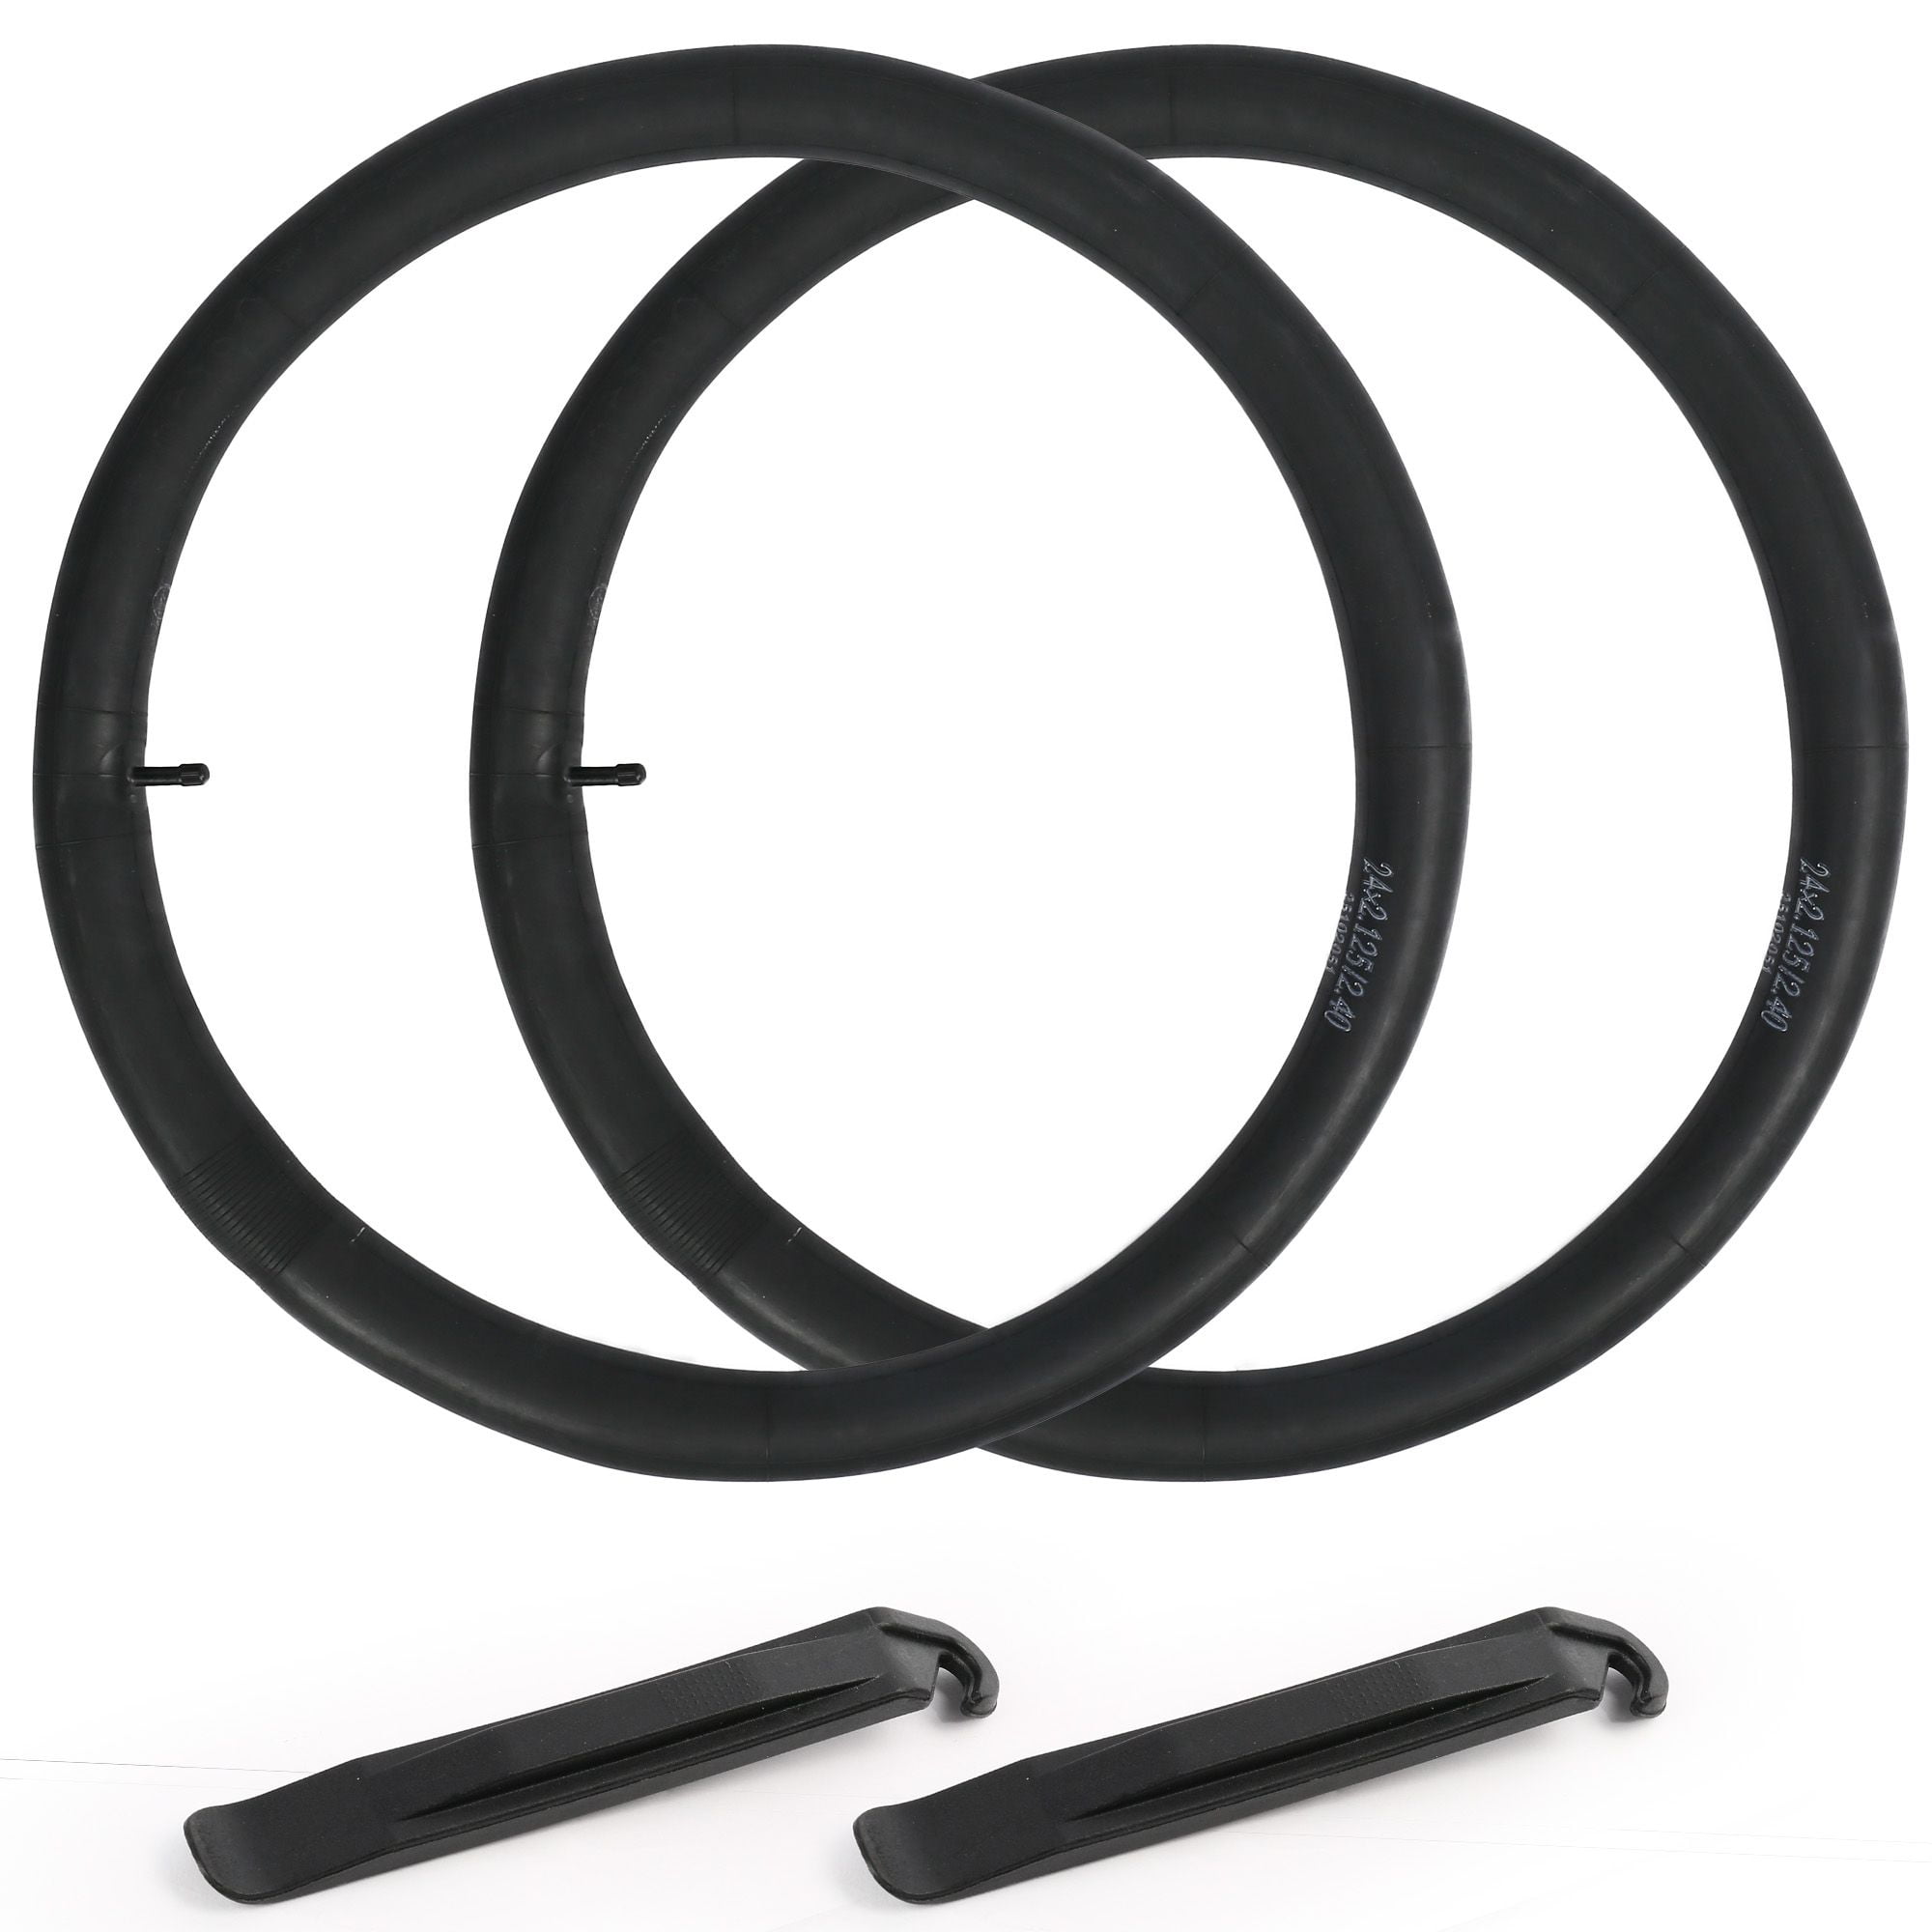 2 PACK *1st Class Post* CYCLE INNER TUBES 24" x 1 3/8 SCHRADER VALVE BIKE 